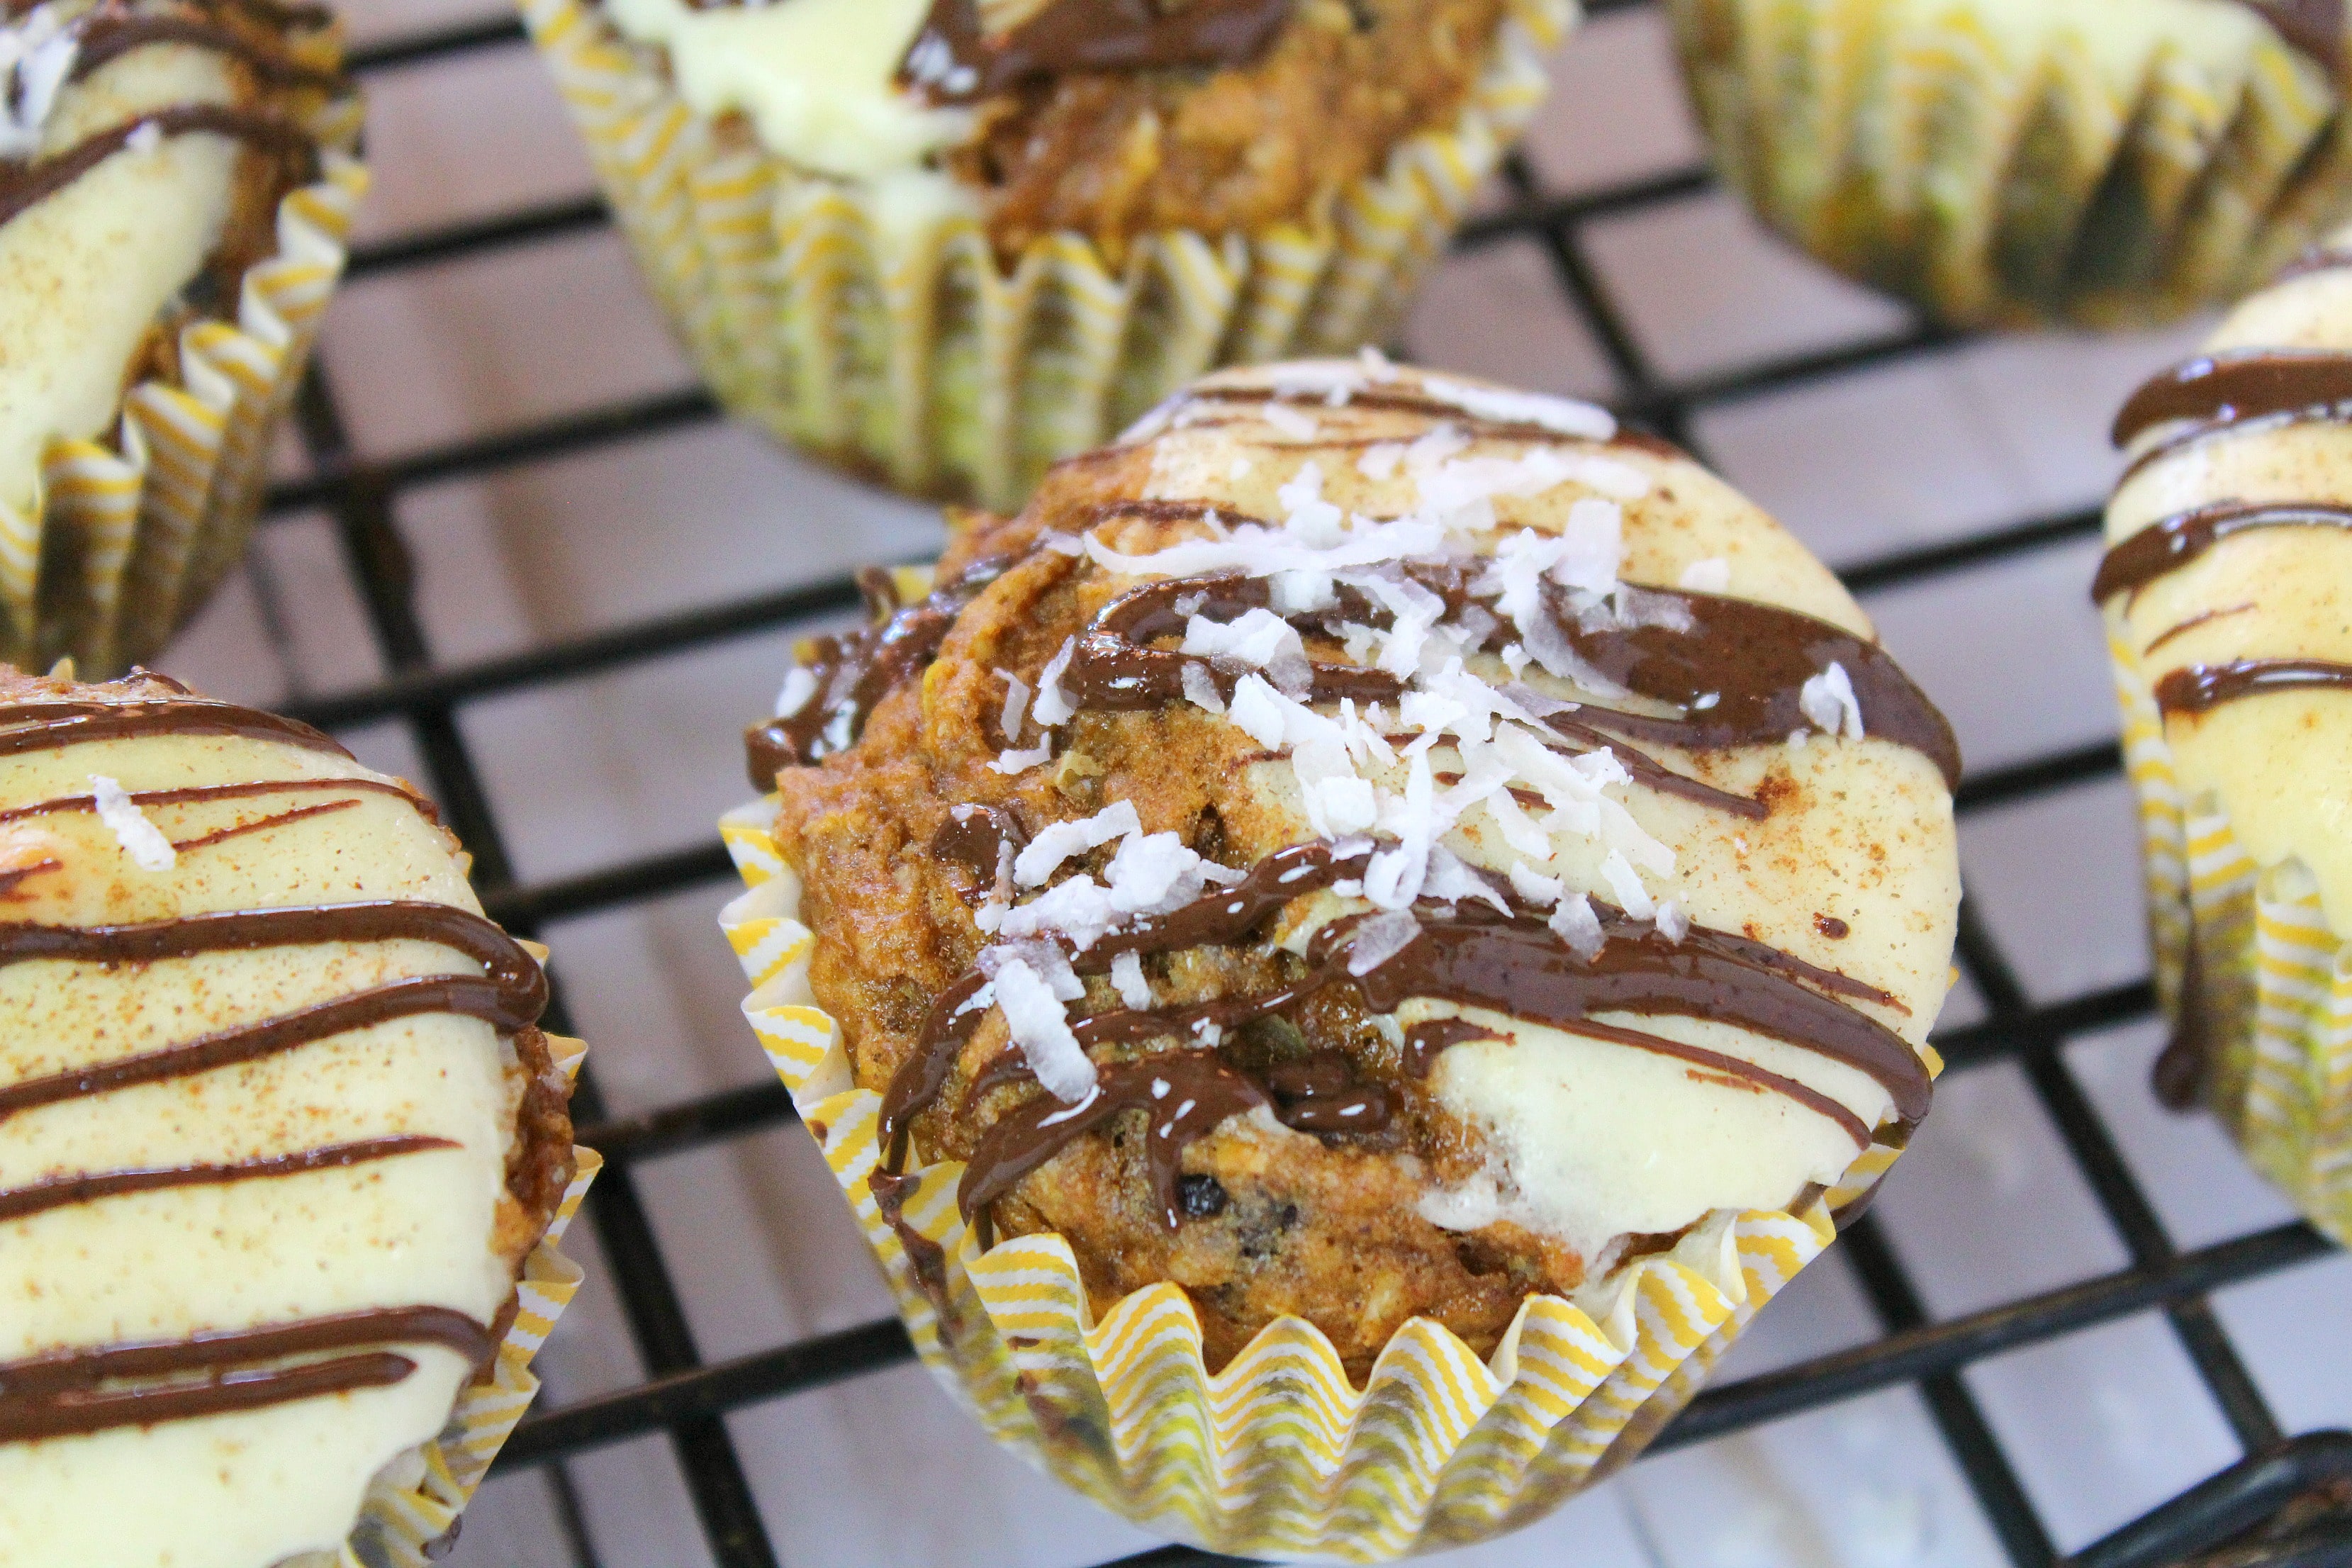 Add a drizzle of chocolate and shredded coconut to finished muffins then enjoy.